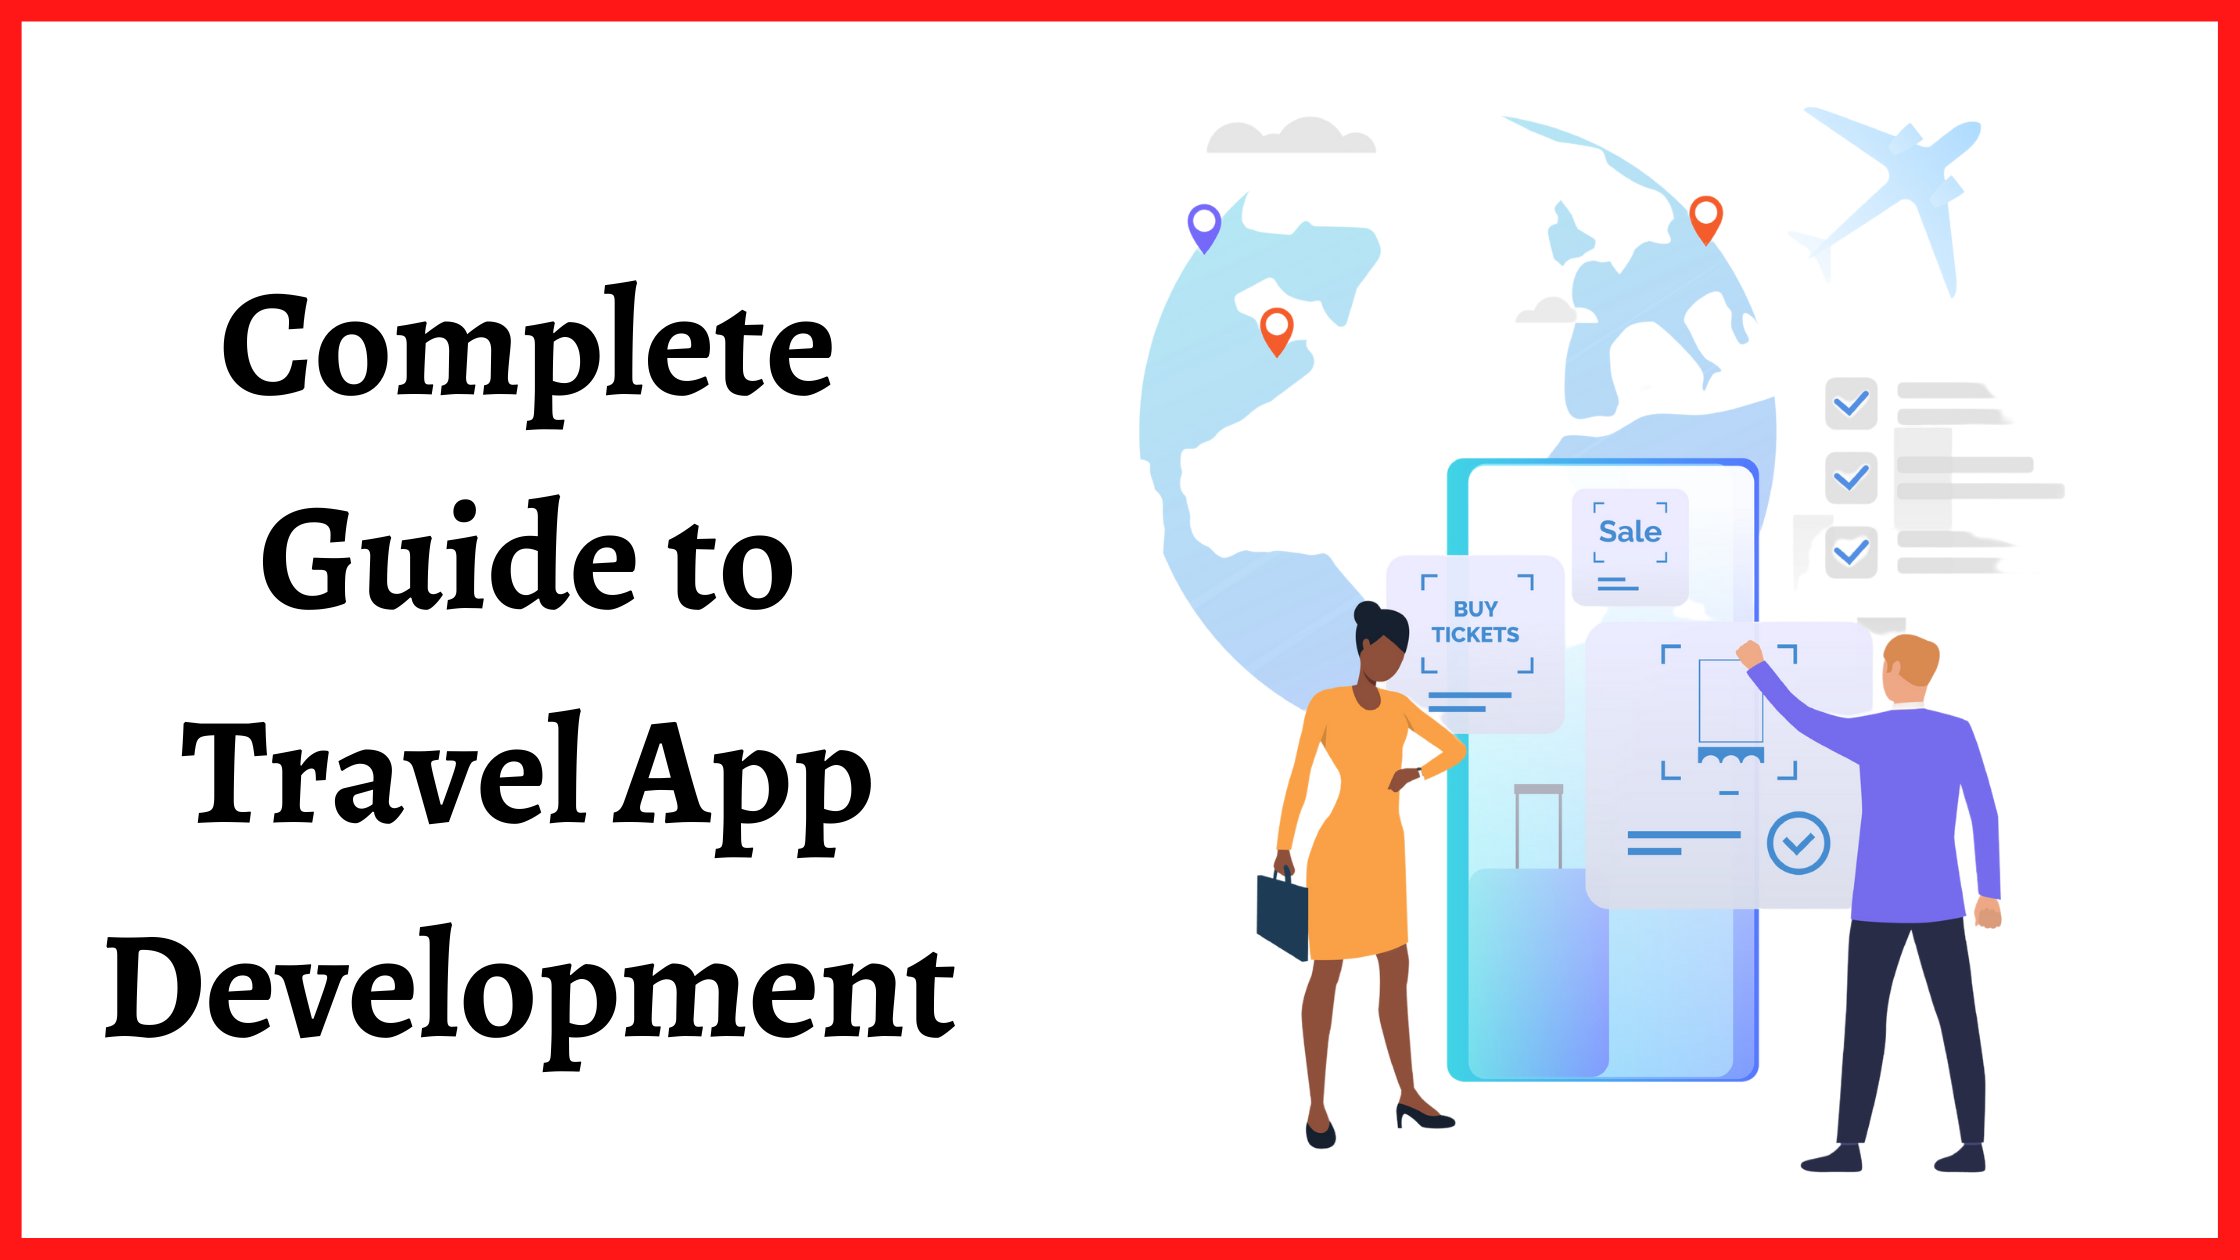 Complete Guide to Travel App Development